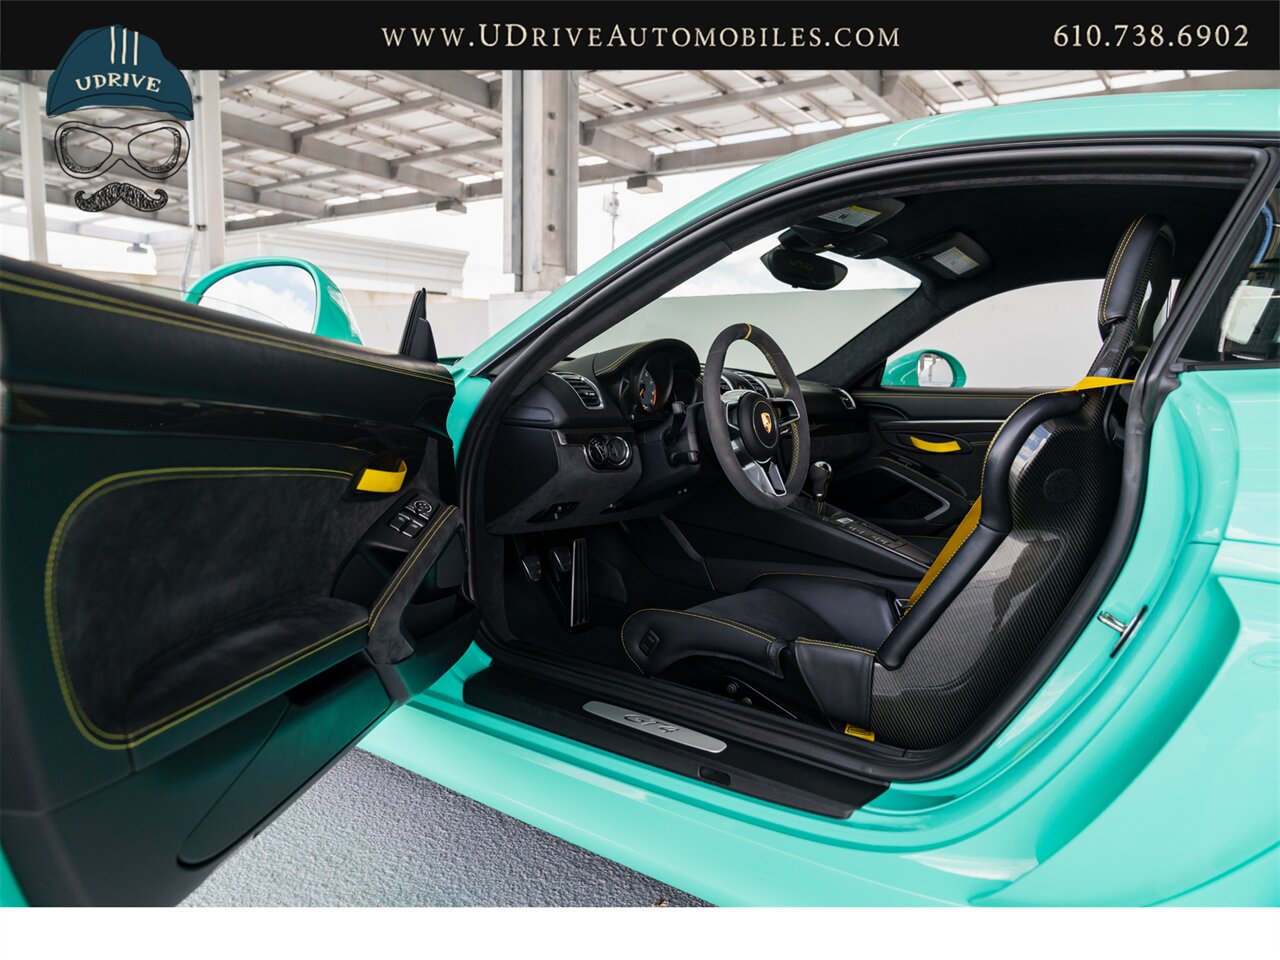 2016 Porsche Cayman GT4  PTS Mint Green 1 of 2 PCCB Bucket Seats PPF - Photo 27 - West Chester, PA 19382